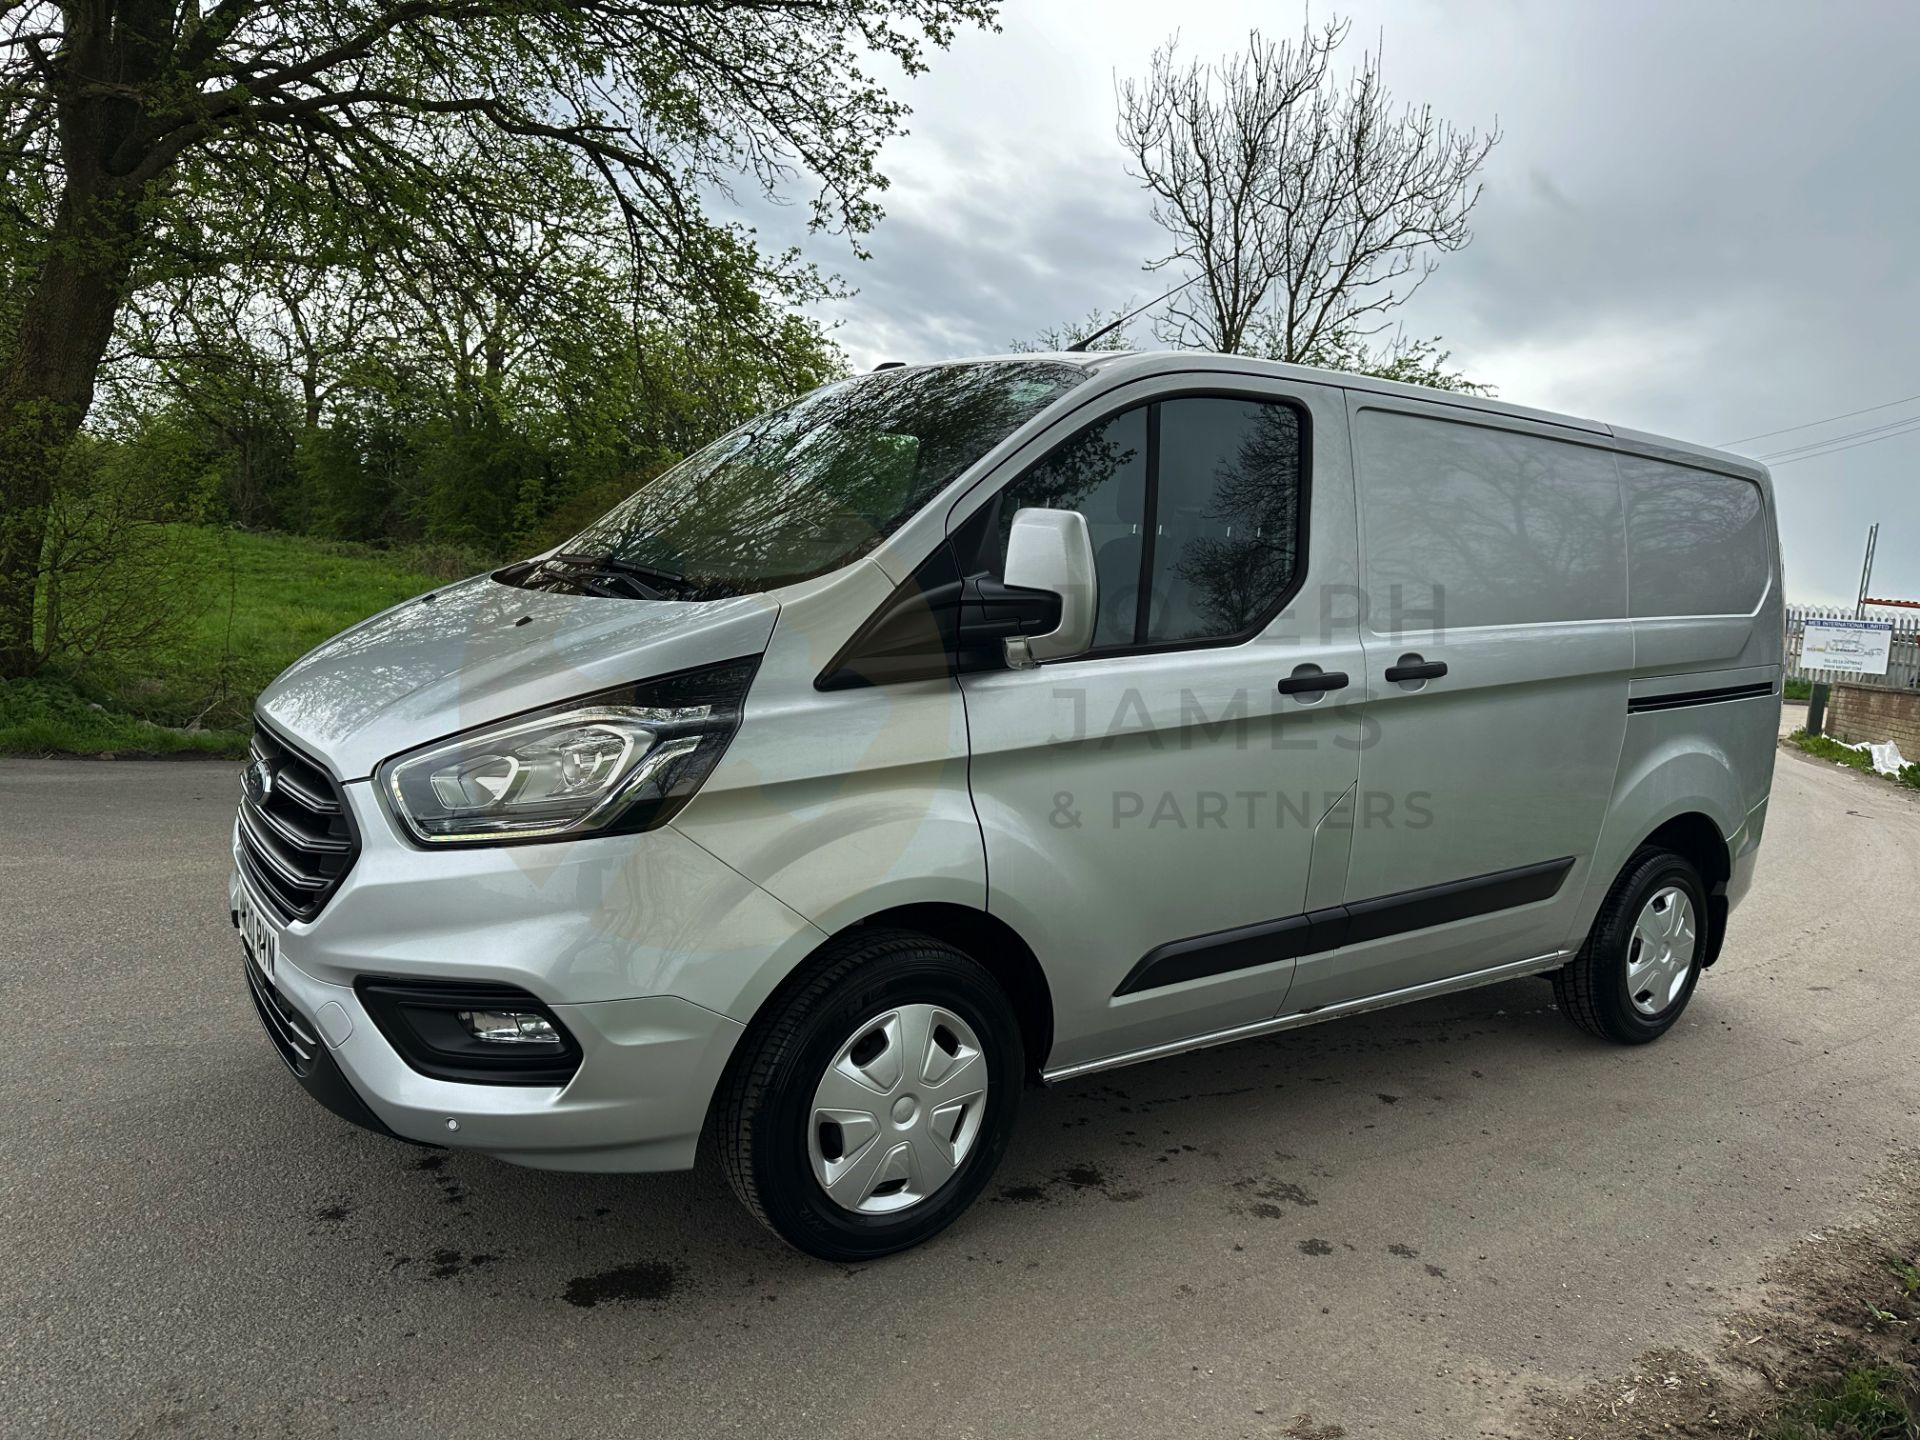 (ON SALE) FORD TRANSIT CUSTOM "TREND" 2.0TDCI (130) 20 REG -1 OWNER- SILVER -GREAT SPEC -LOW MILEAGE - Image 7 of 38